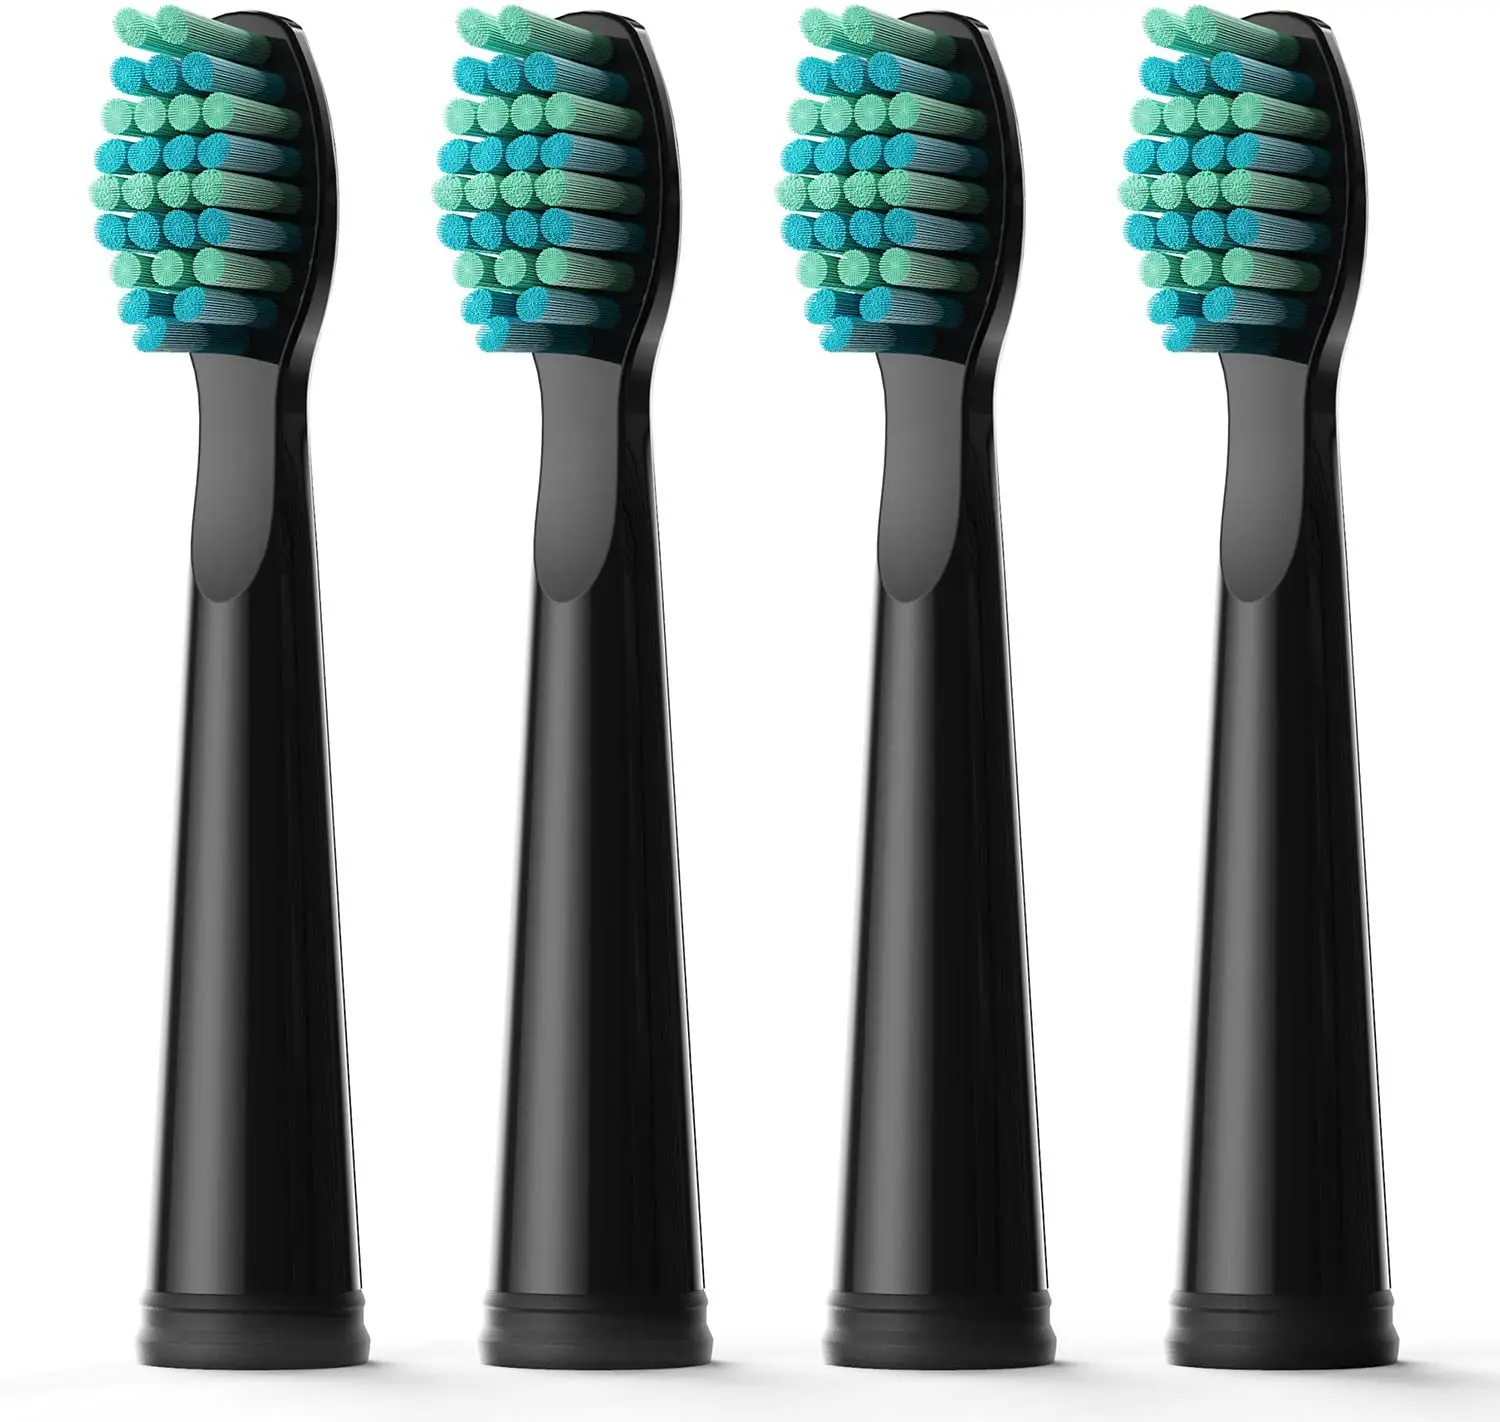 irywill Tooth Brush Head Electric Toothbrush Heads Sonic Replaceable Soft Bristle for FW-507 FW-508 FW-917 FW-959 FW-551